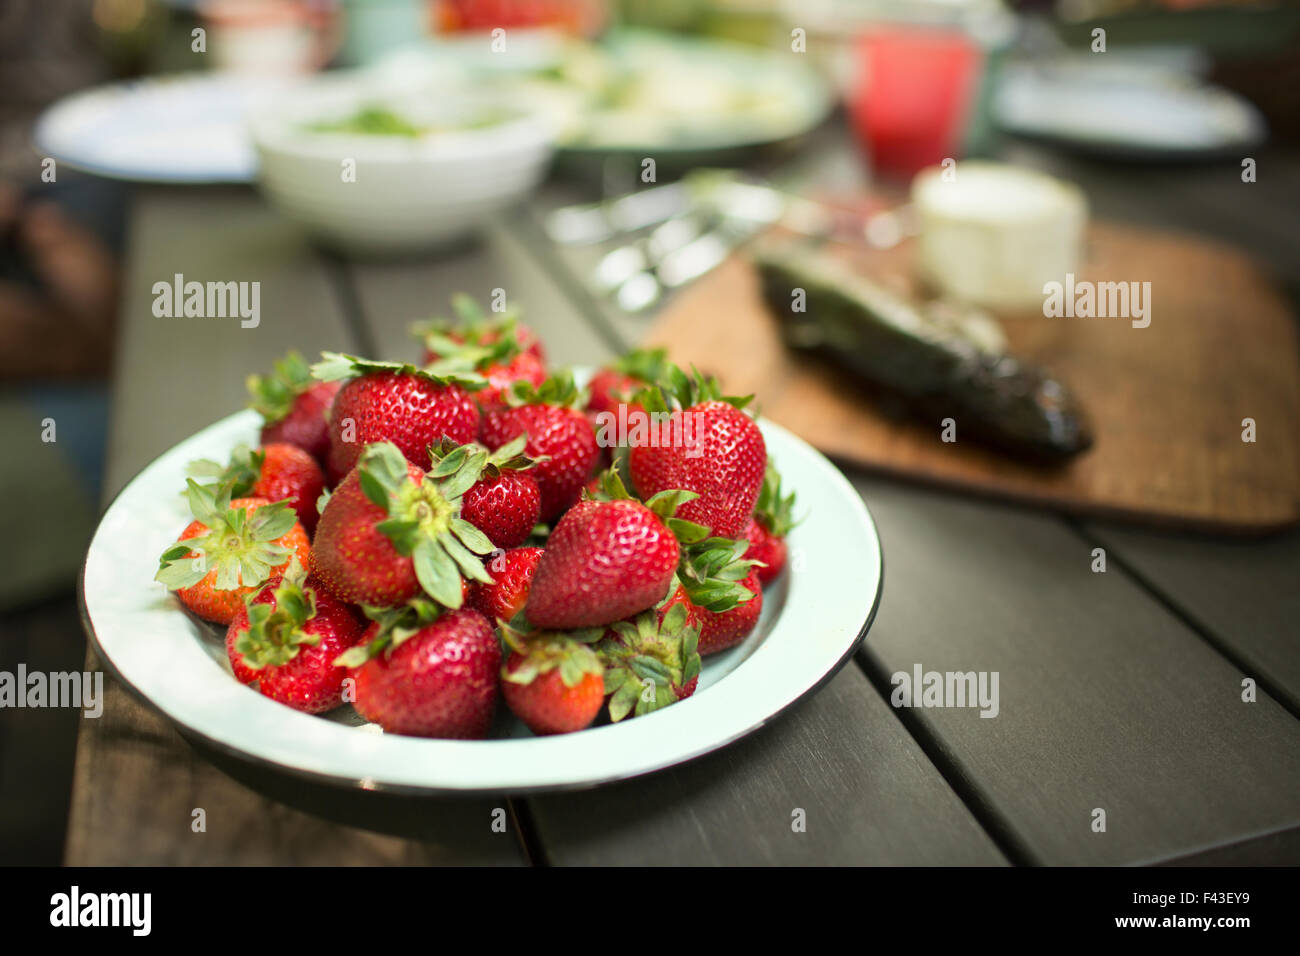 Picnic table with a meal laid out. A place of fresh home grown newly picked strawberries. Stock Photo